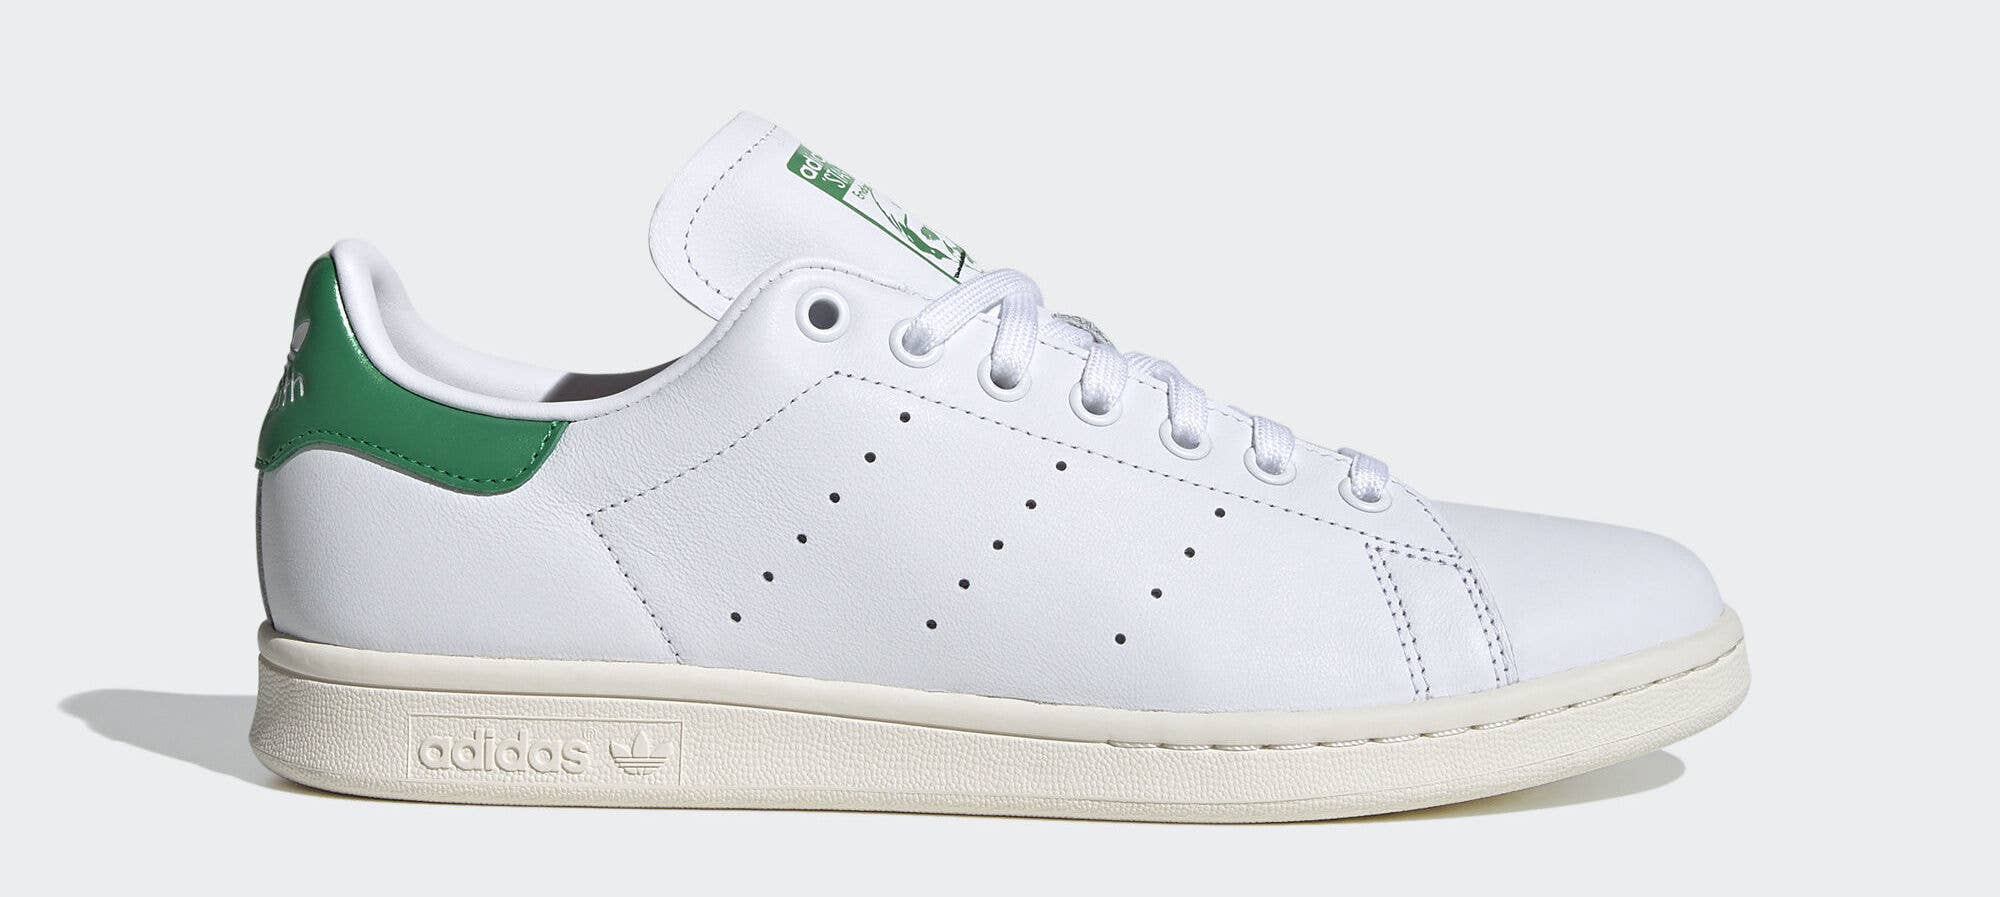 rol Momentum koper The Adidas Stan Smith Gets an Update for Valentine's Day | Complex